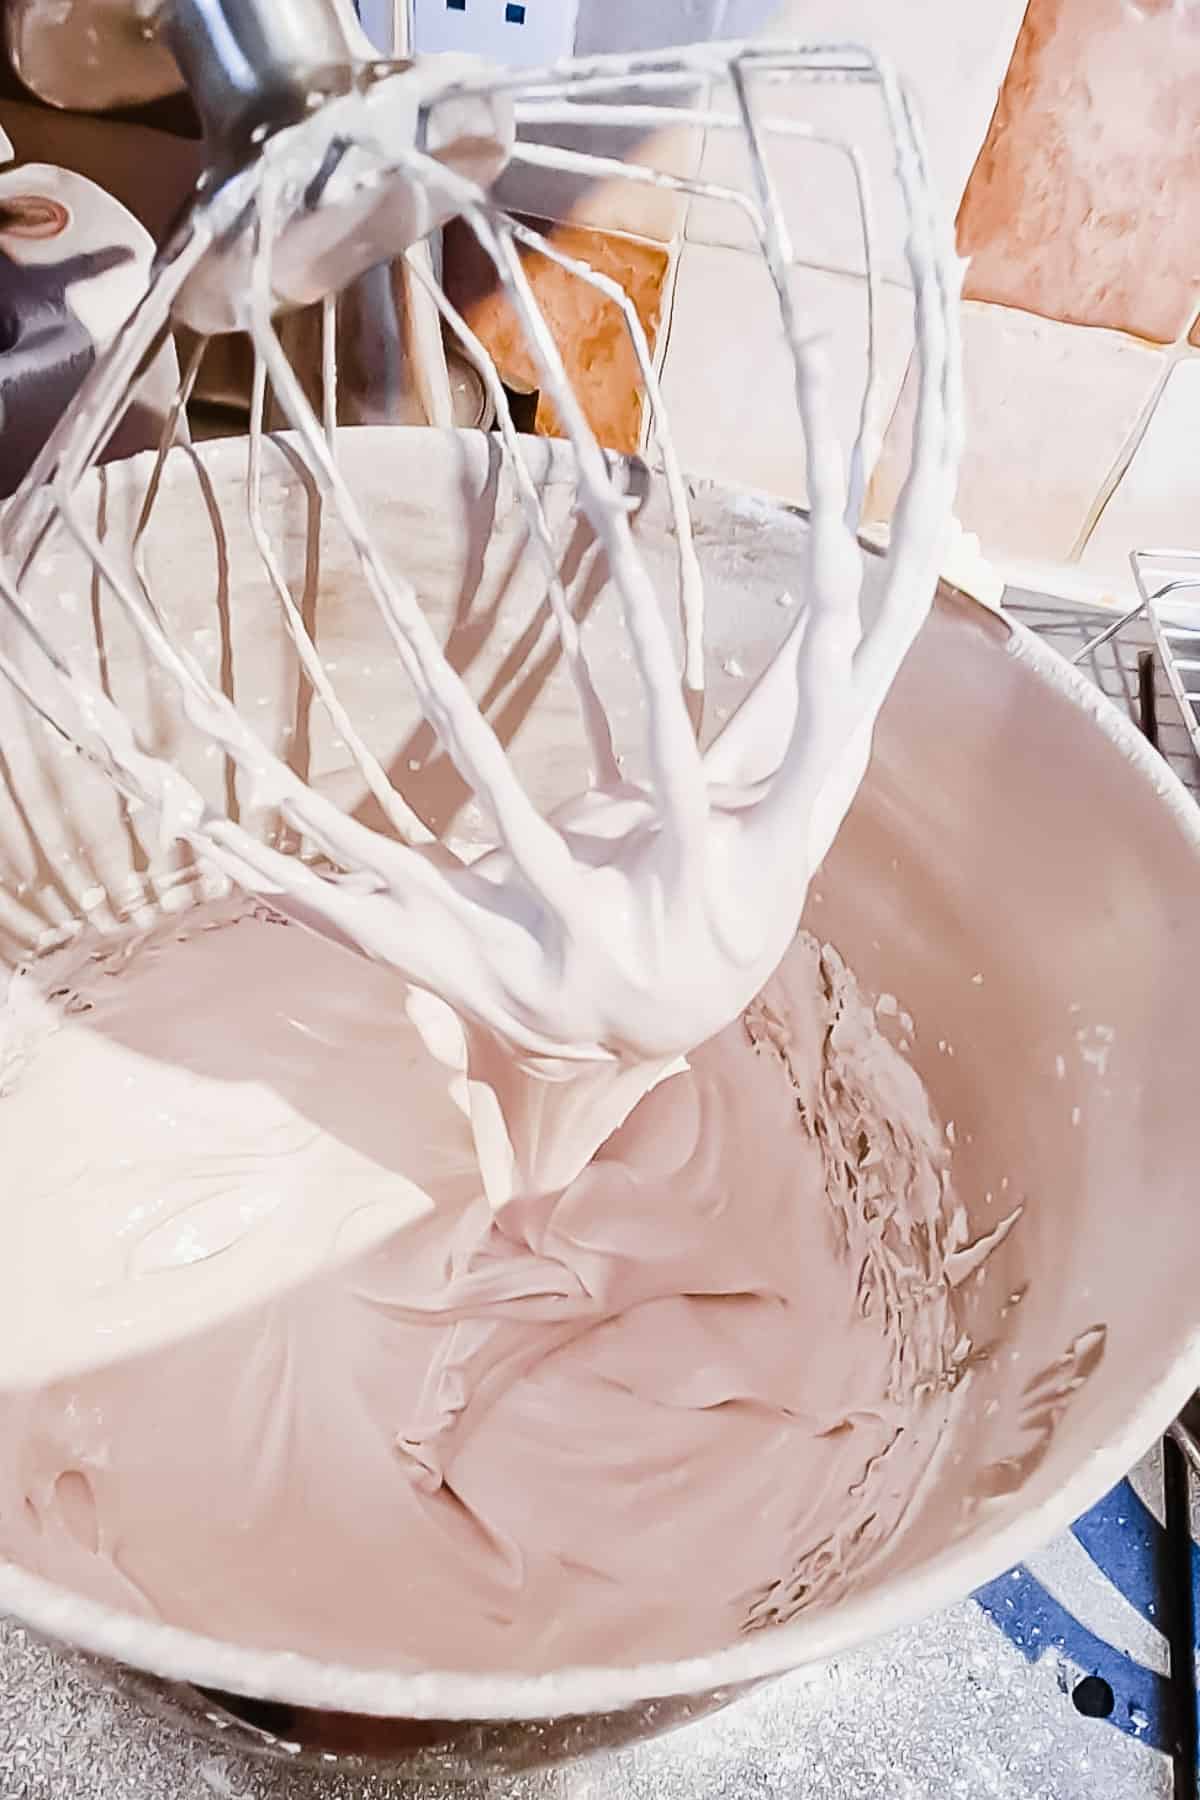 whipped aquafaba in a mixer